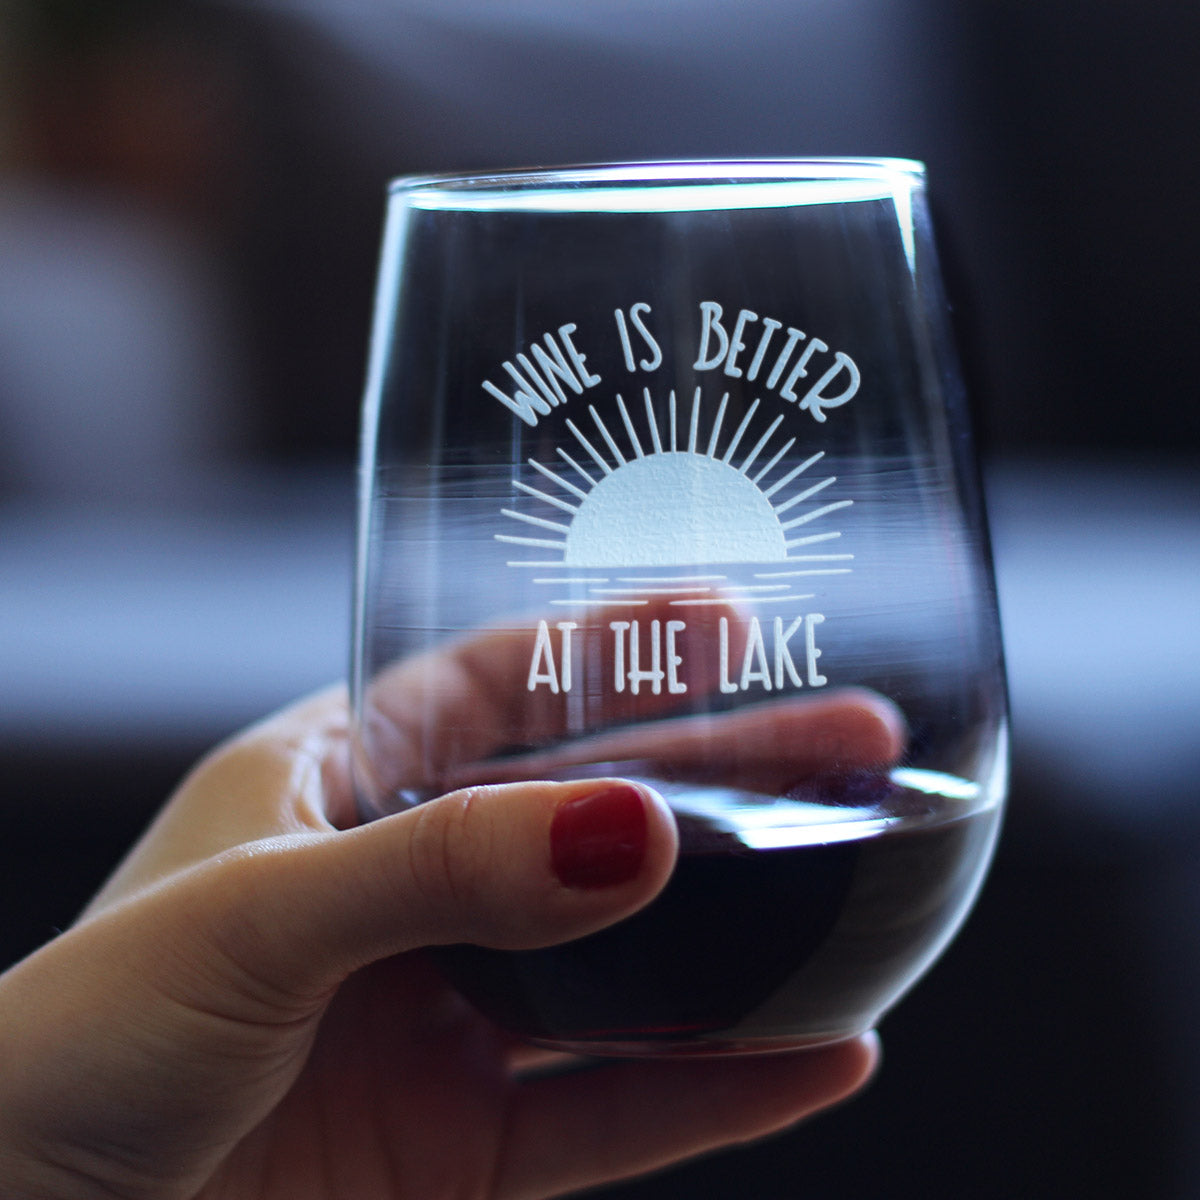 Wine is Better at the Lake - Stemless Wine Glass Gifts for Men &amp; Women - Funny, Cute, Unique Lake House Décor - Large 17 Oz